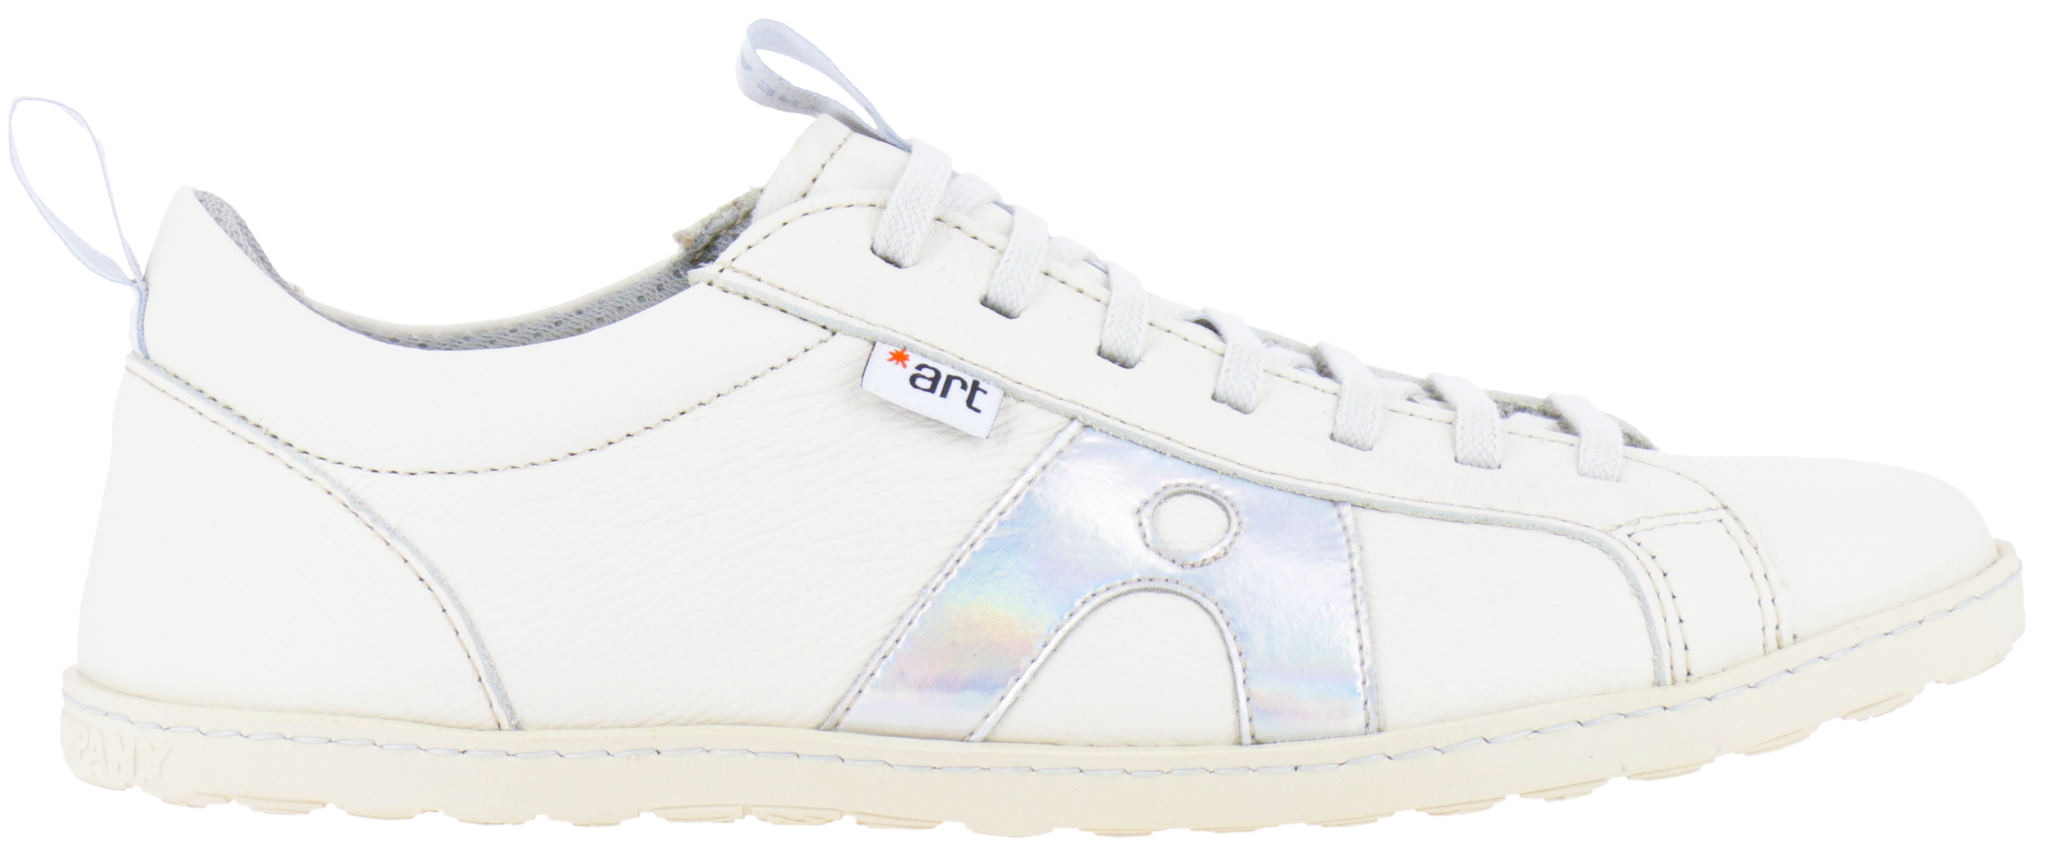 ART 0179 Qwerty Multi Leather Women's Sneakers